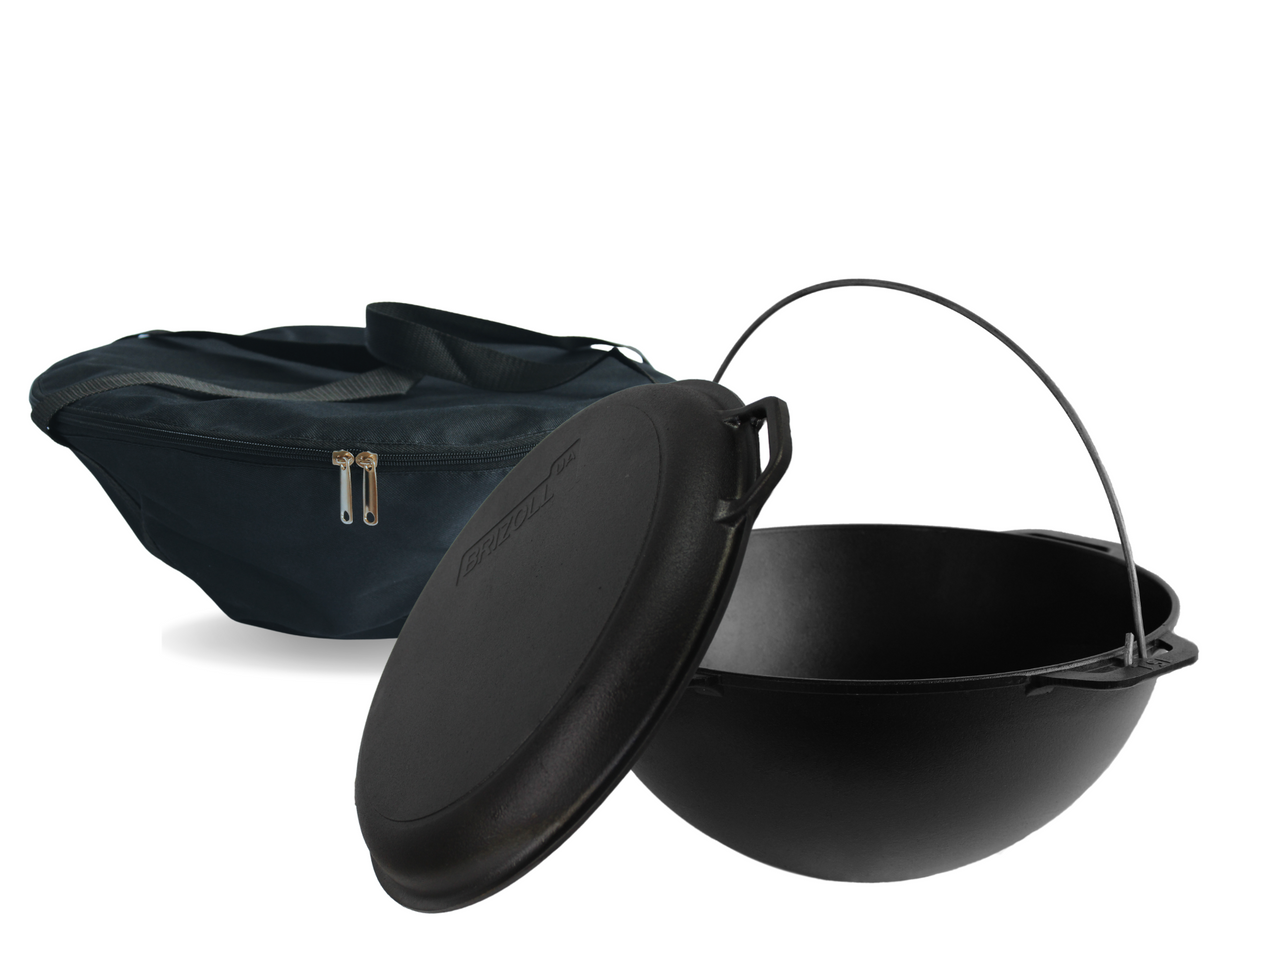 Cast iron asian cauldron 12 L WITH A GRILL LID-FRYING PAN, a bag  and a stand